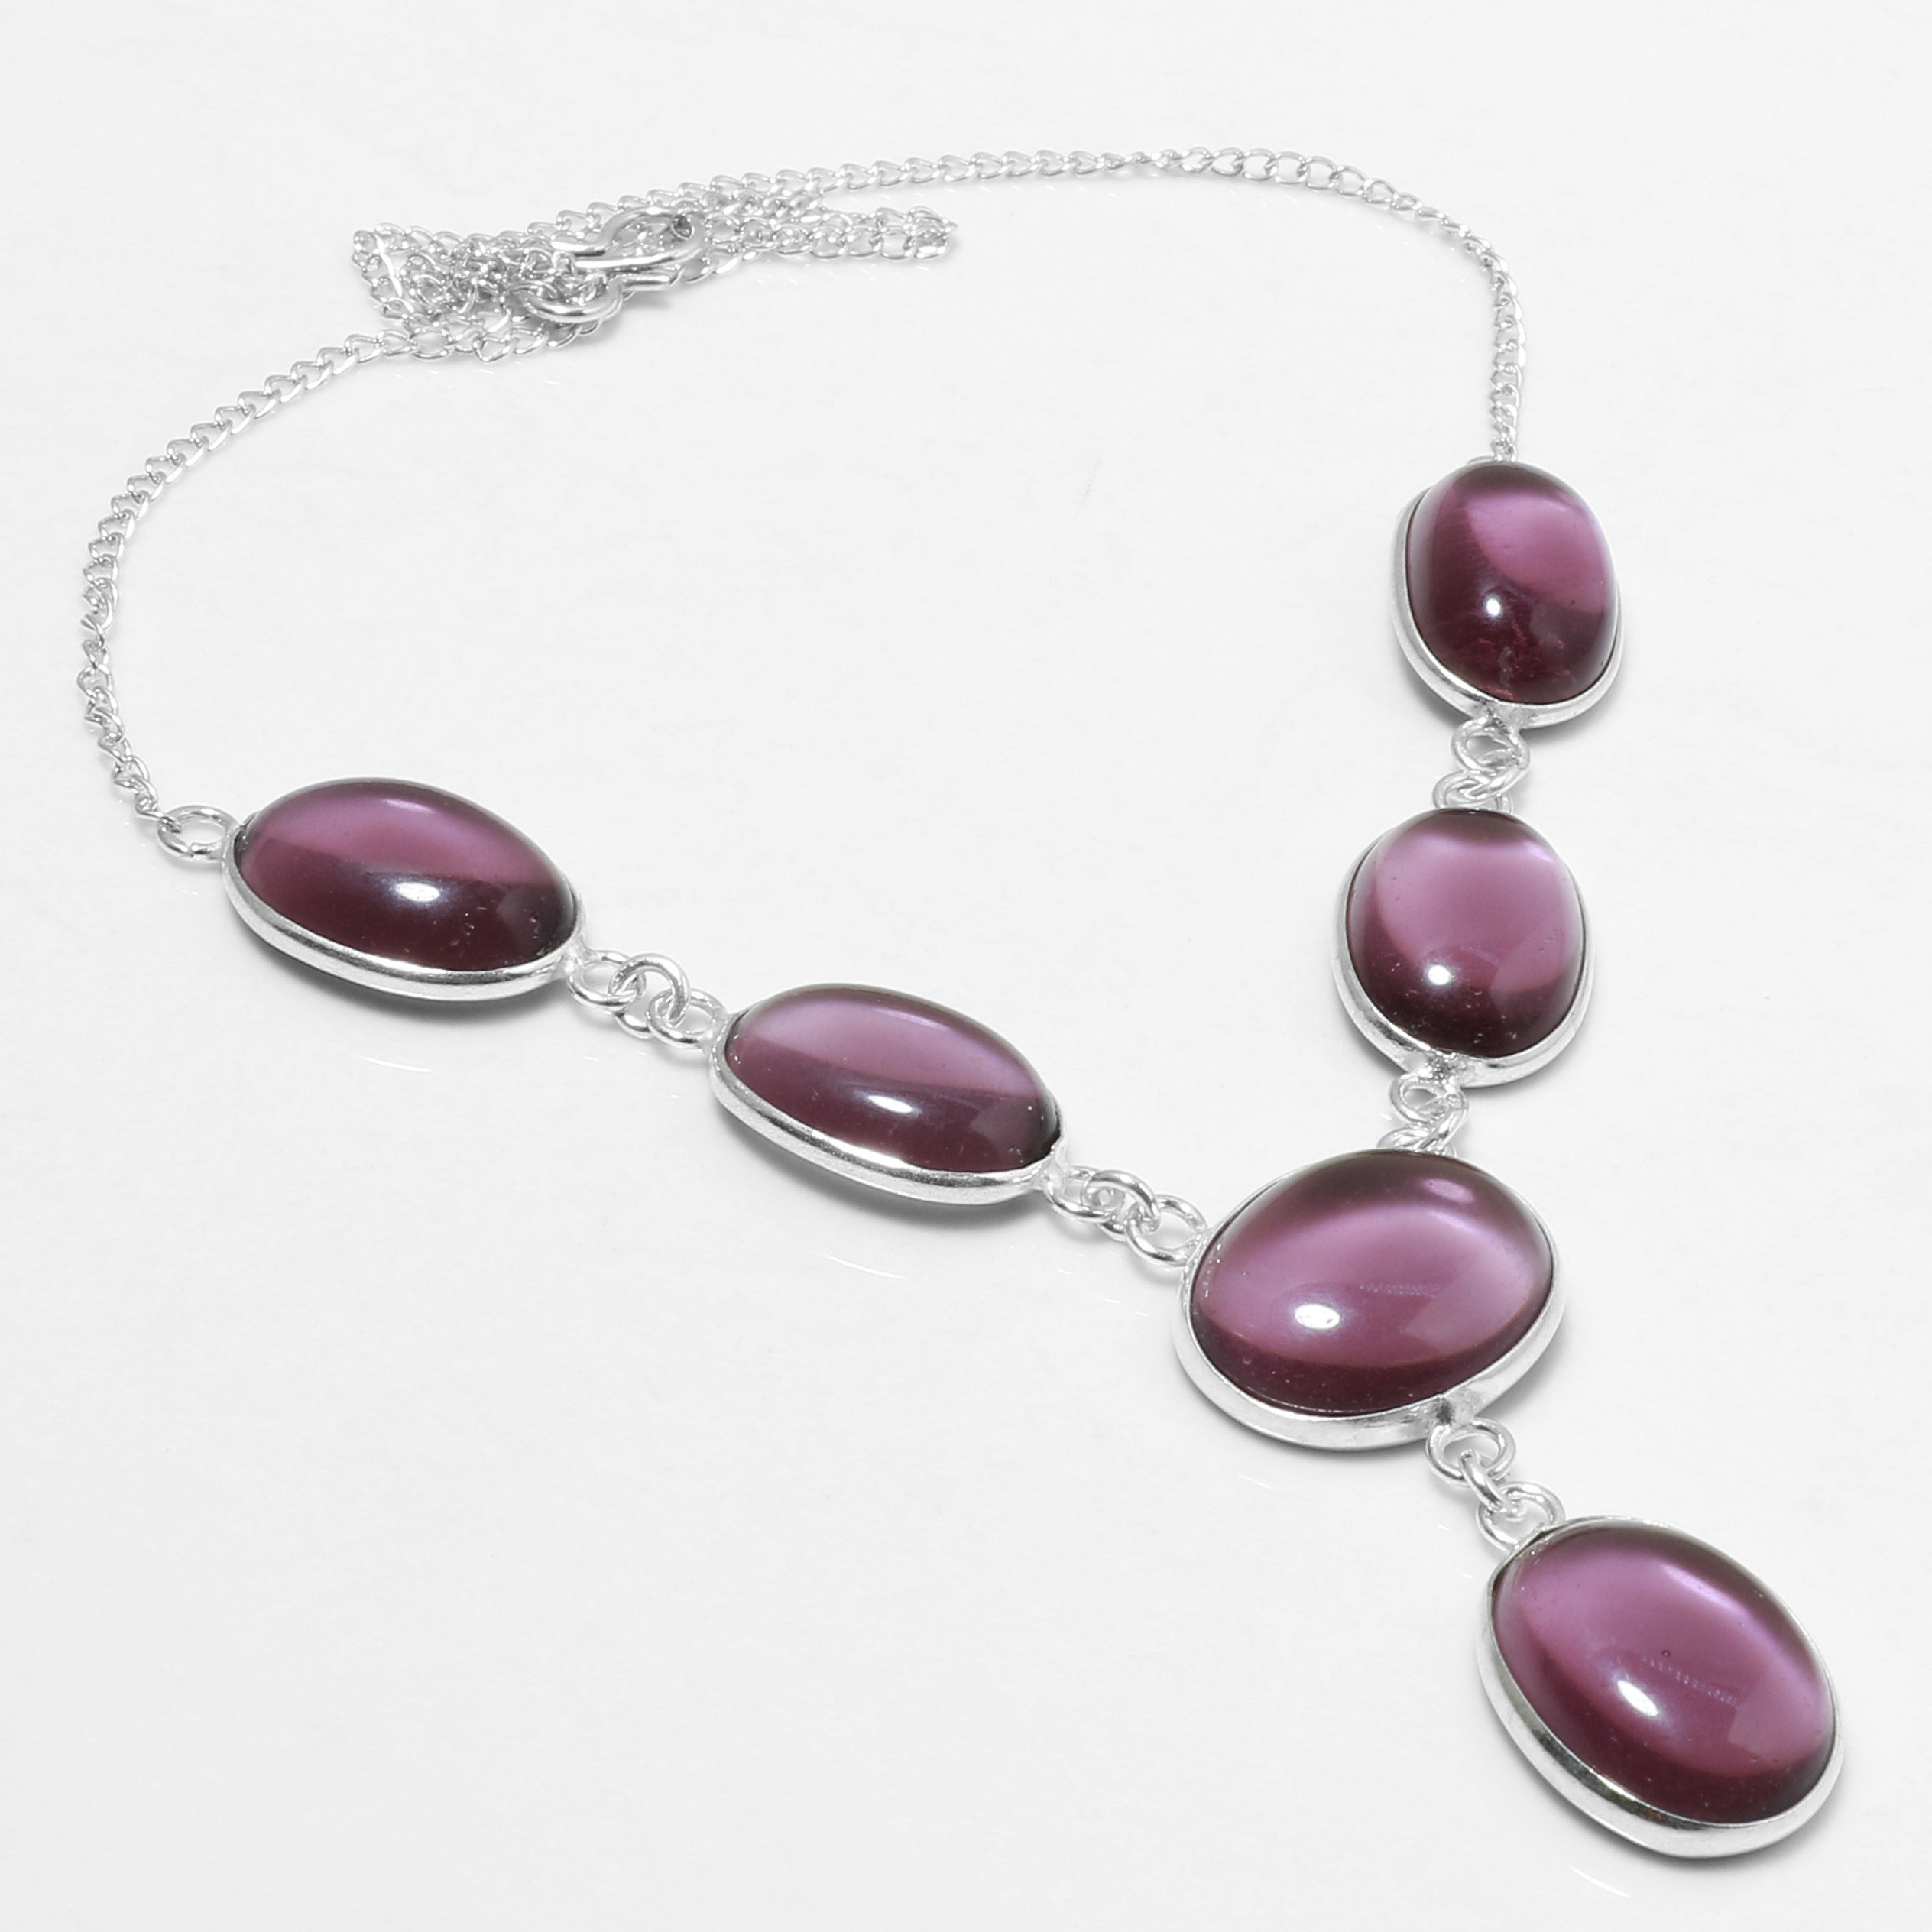 Amethyst Necklace 925 Silver Plated Chain Necklace 18 inch  JJ-3684